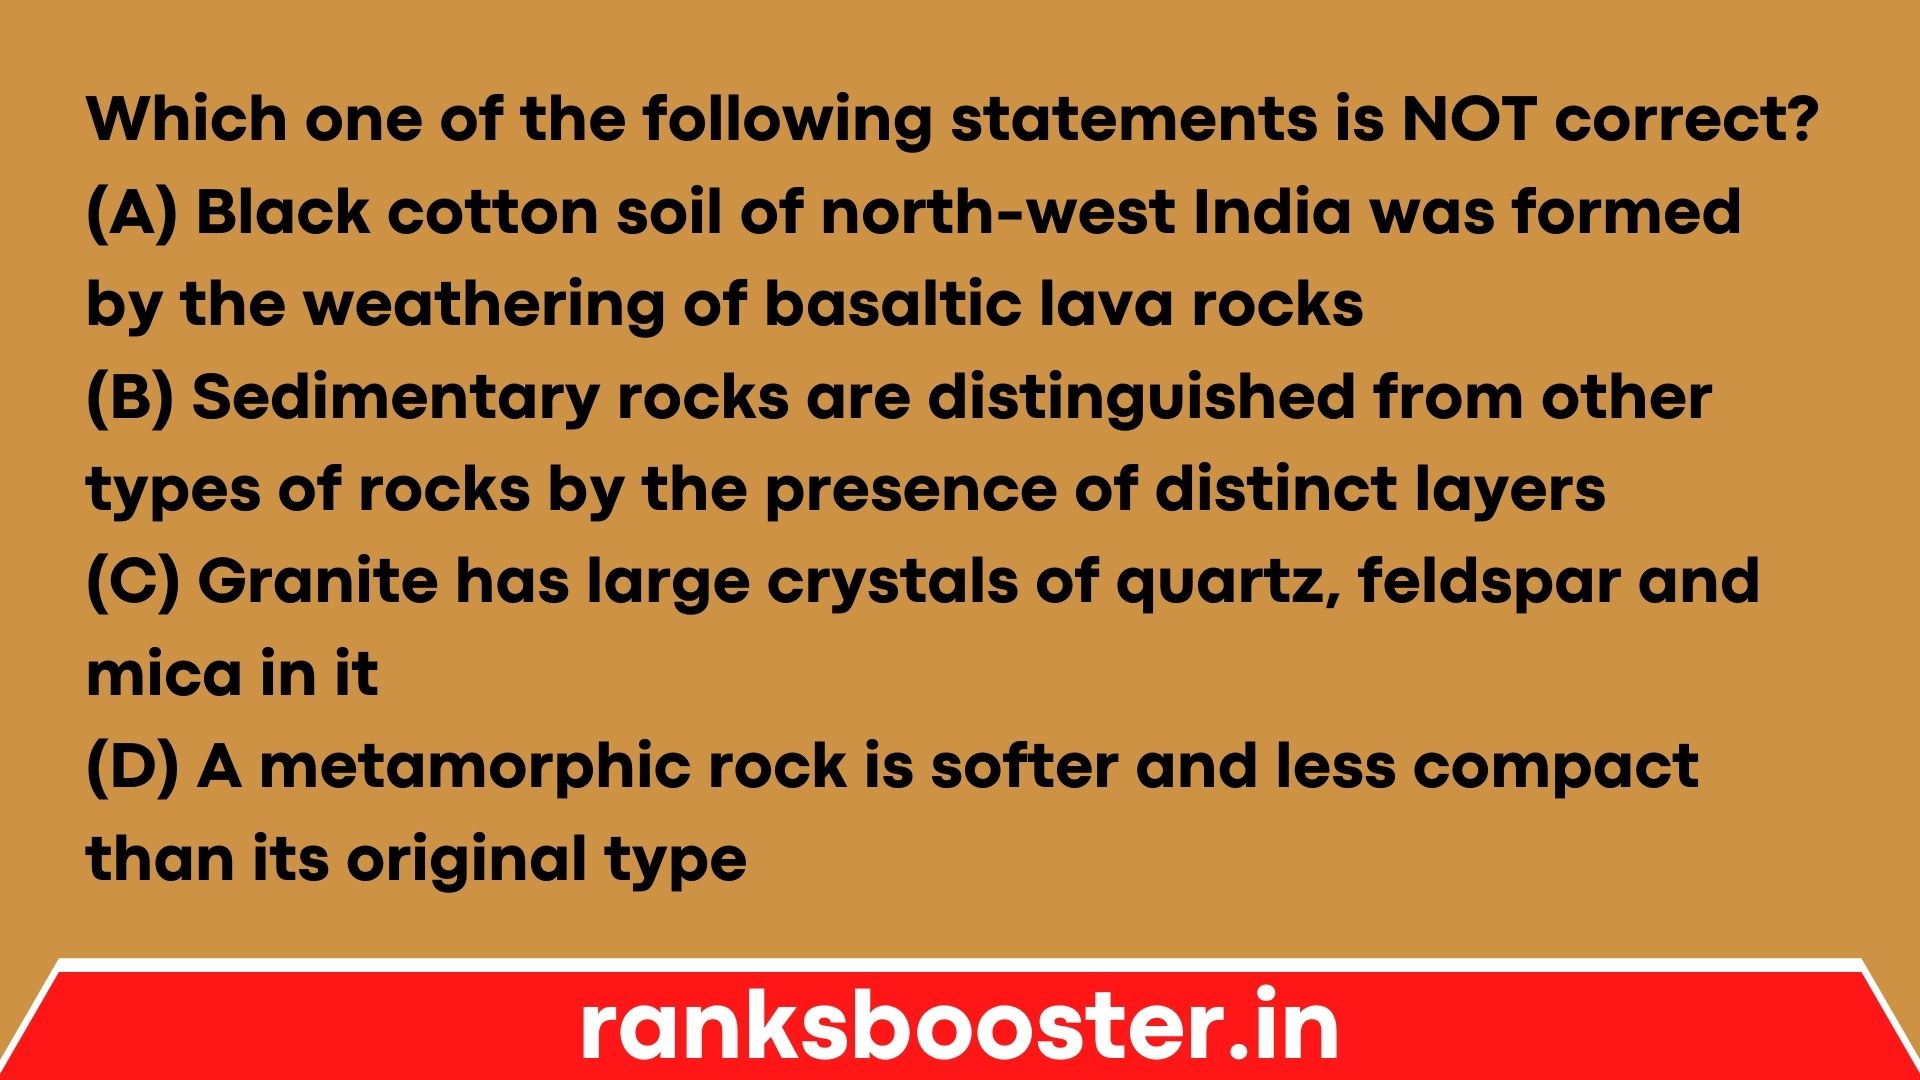 Which one of the following statements is NOT correct? (A) Black cotton soil of north-west India was formed by the weathering of basaltic lava rocks (B) Sedimentary rocks are distinguished from other types of rocks by the presence of distinct layers (C) Granite has large crystals of quartz, feldspar and mica in it (D) A metamorphic rock is softer and less compact than its original type